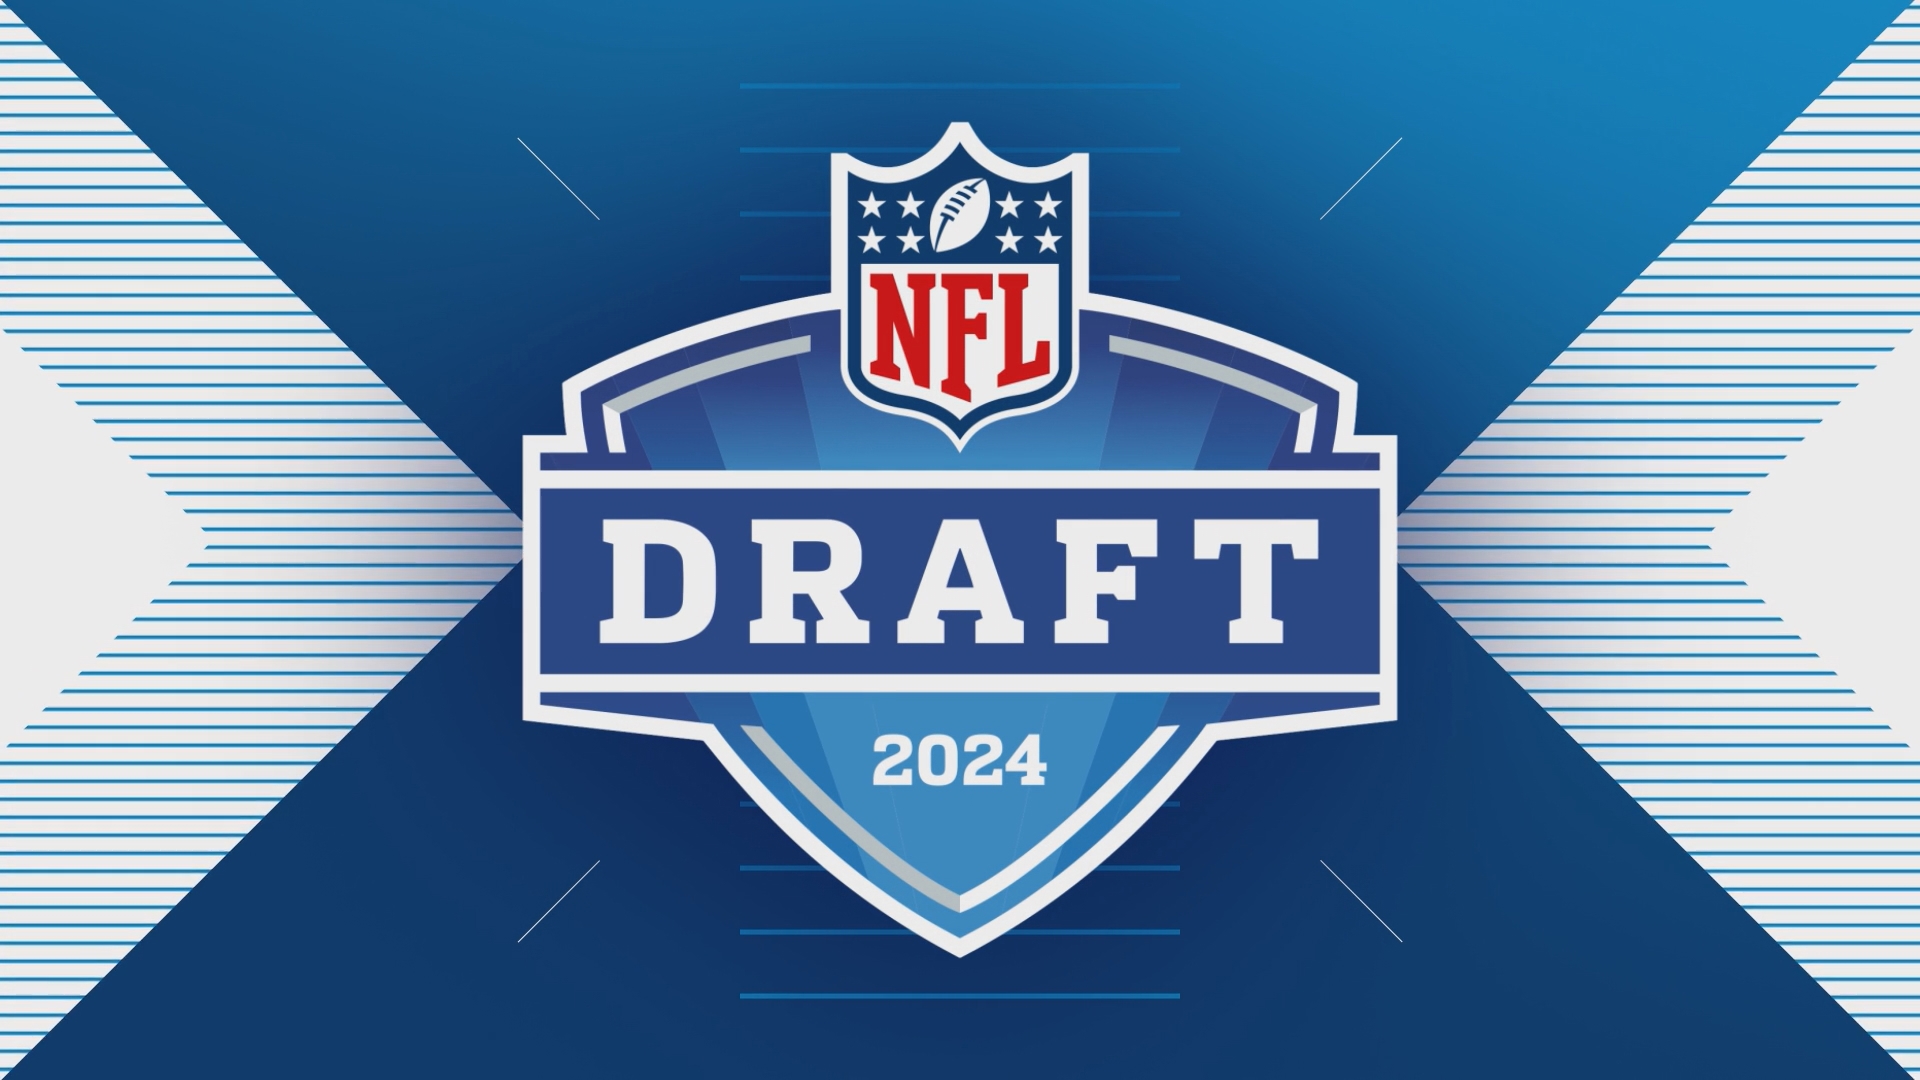 Local 5 Sports Director Reina Garcia is joined by Co-Host of the Locked On NFL Draft Podcast Keith Sanchez to preview this year's in-state draft prospects.